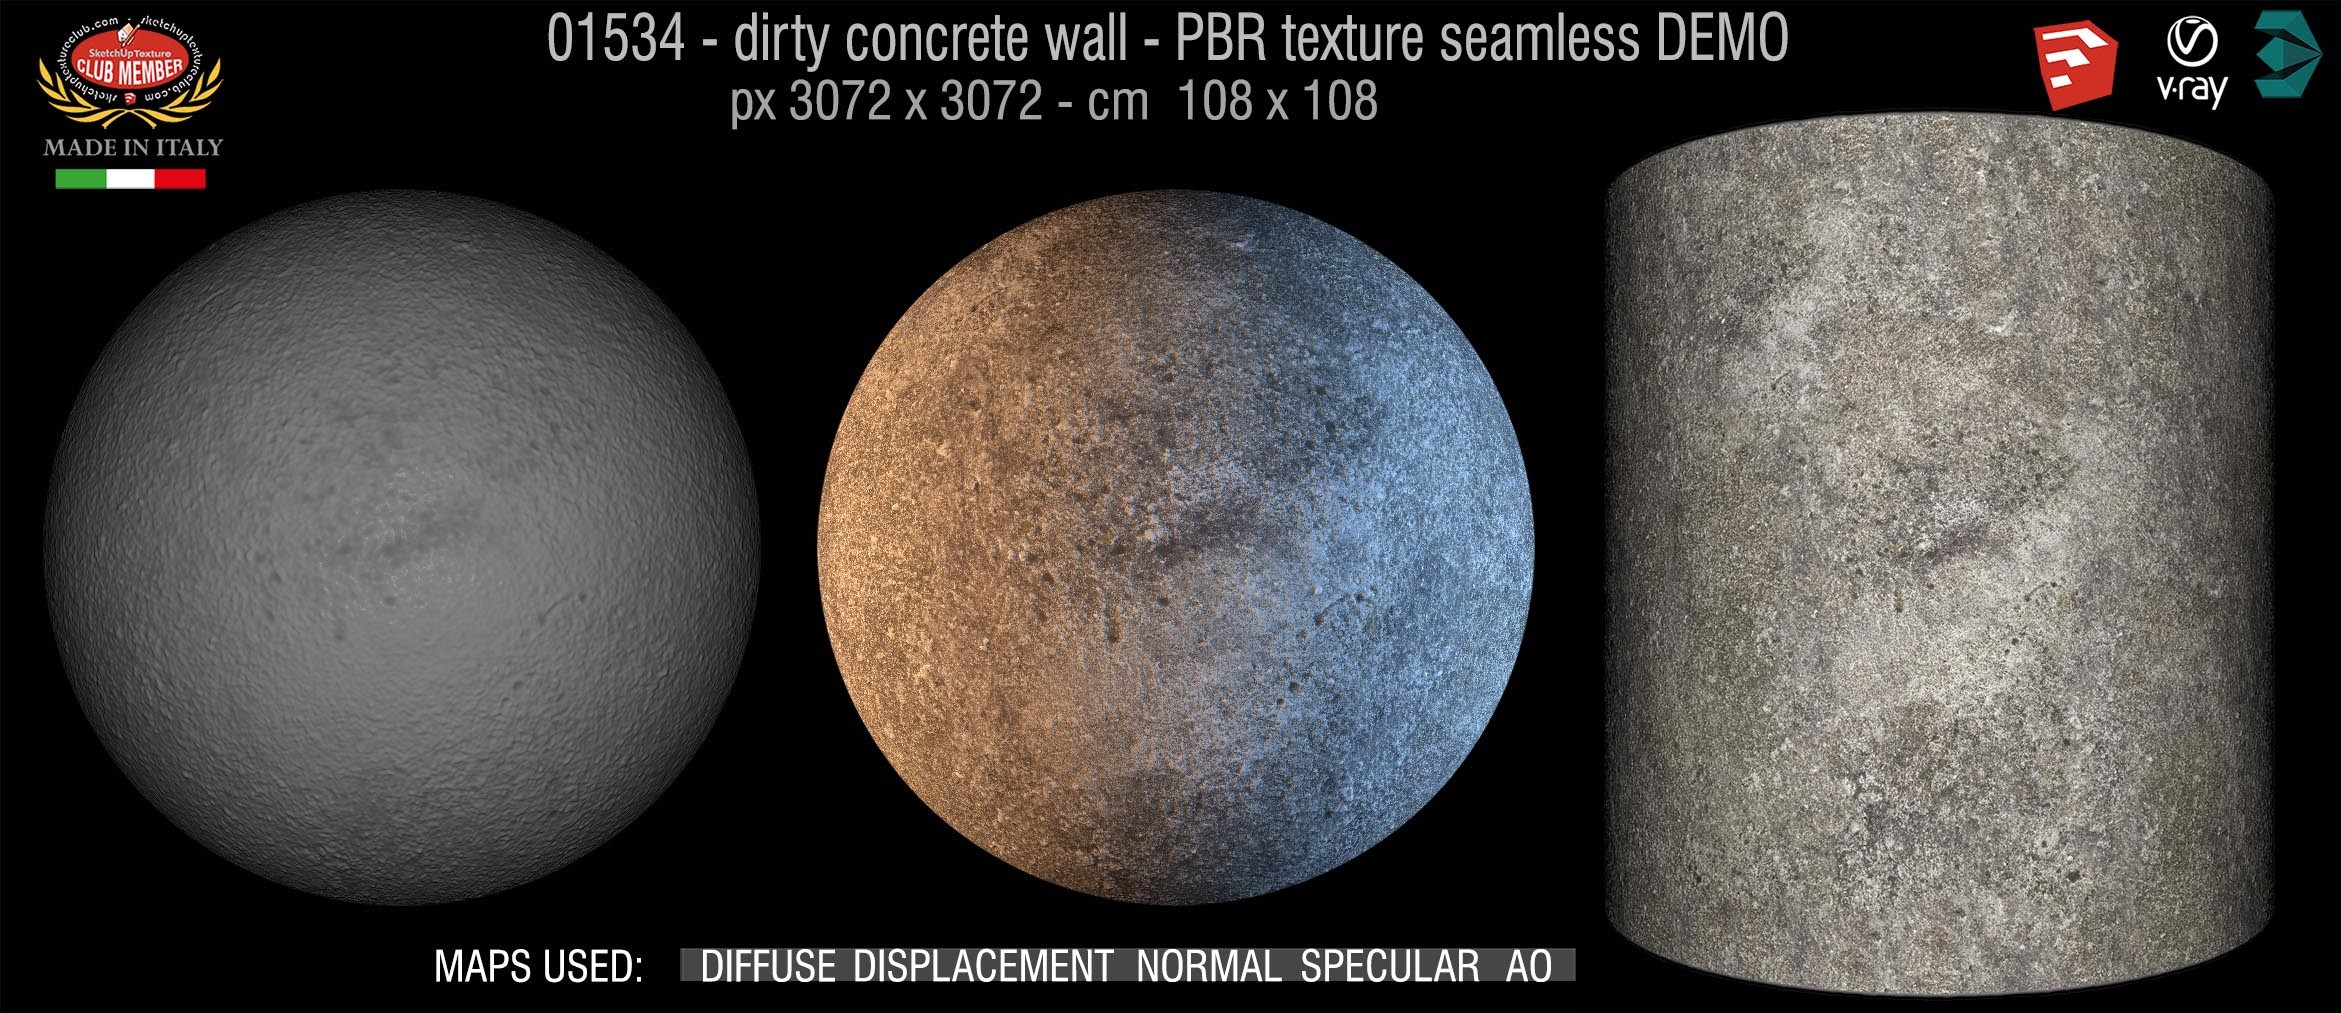 01534 Concrete bare dirty wall PBR texture seamless DEMO